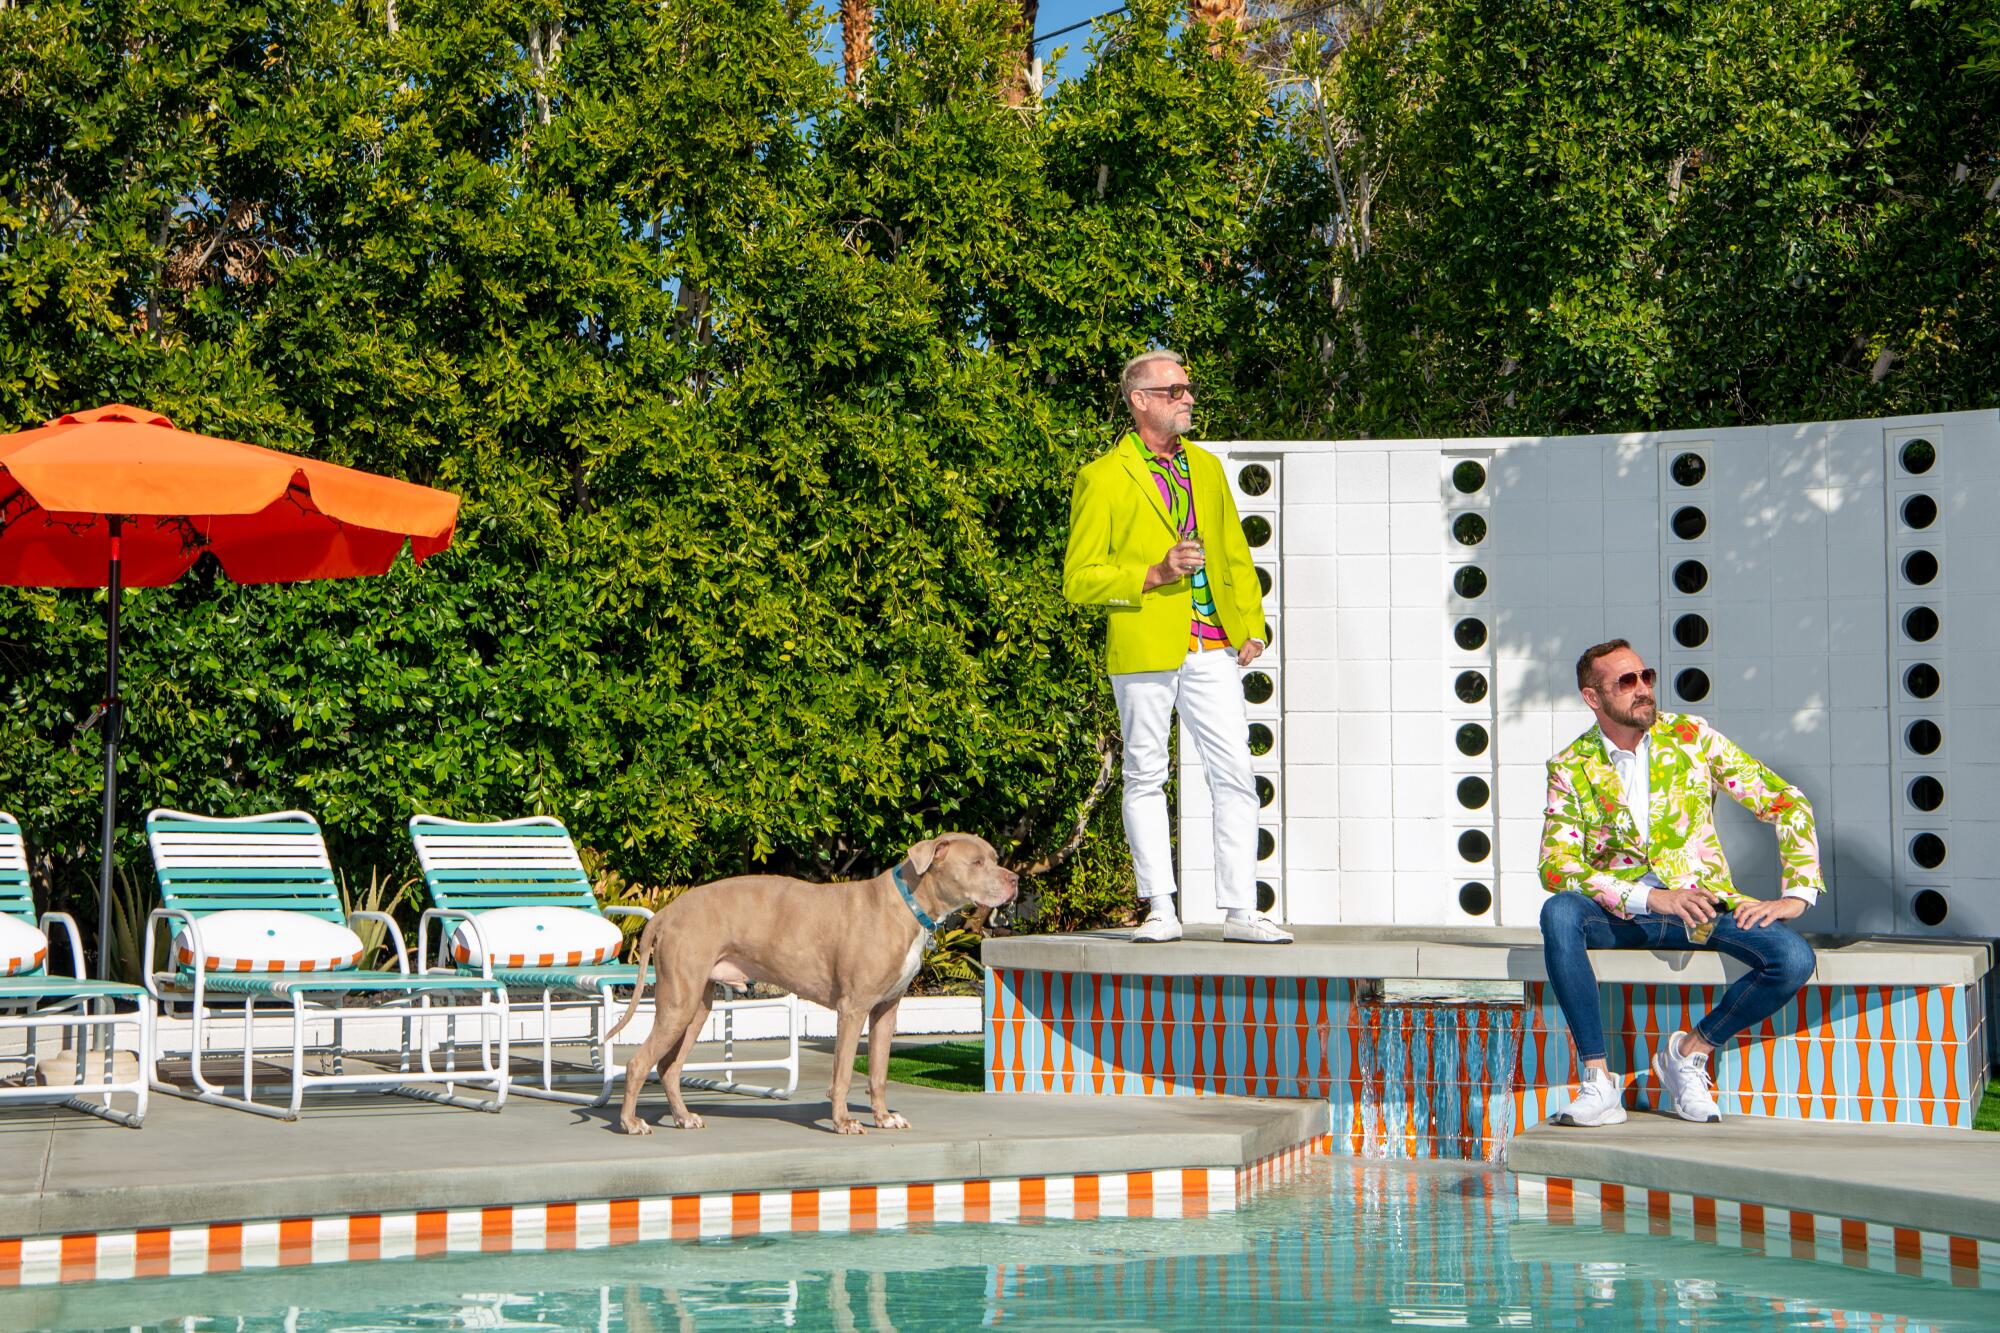 A dog, a standing man and a seated man next to a backyard pool